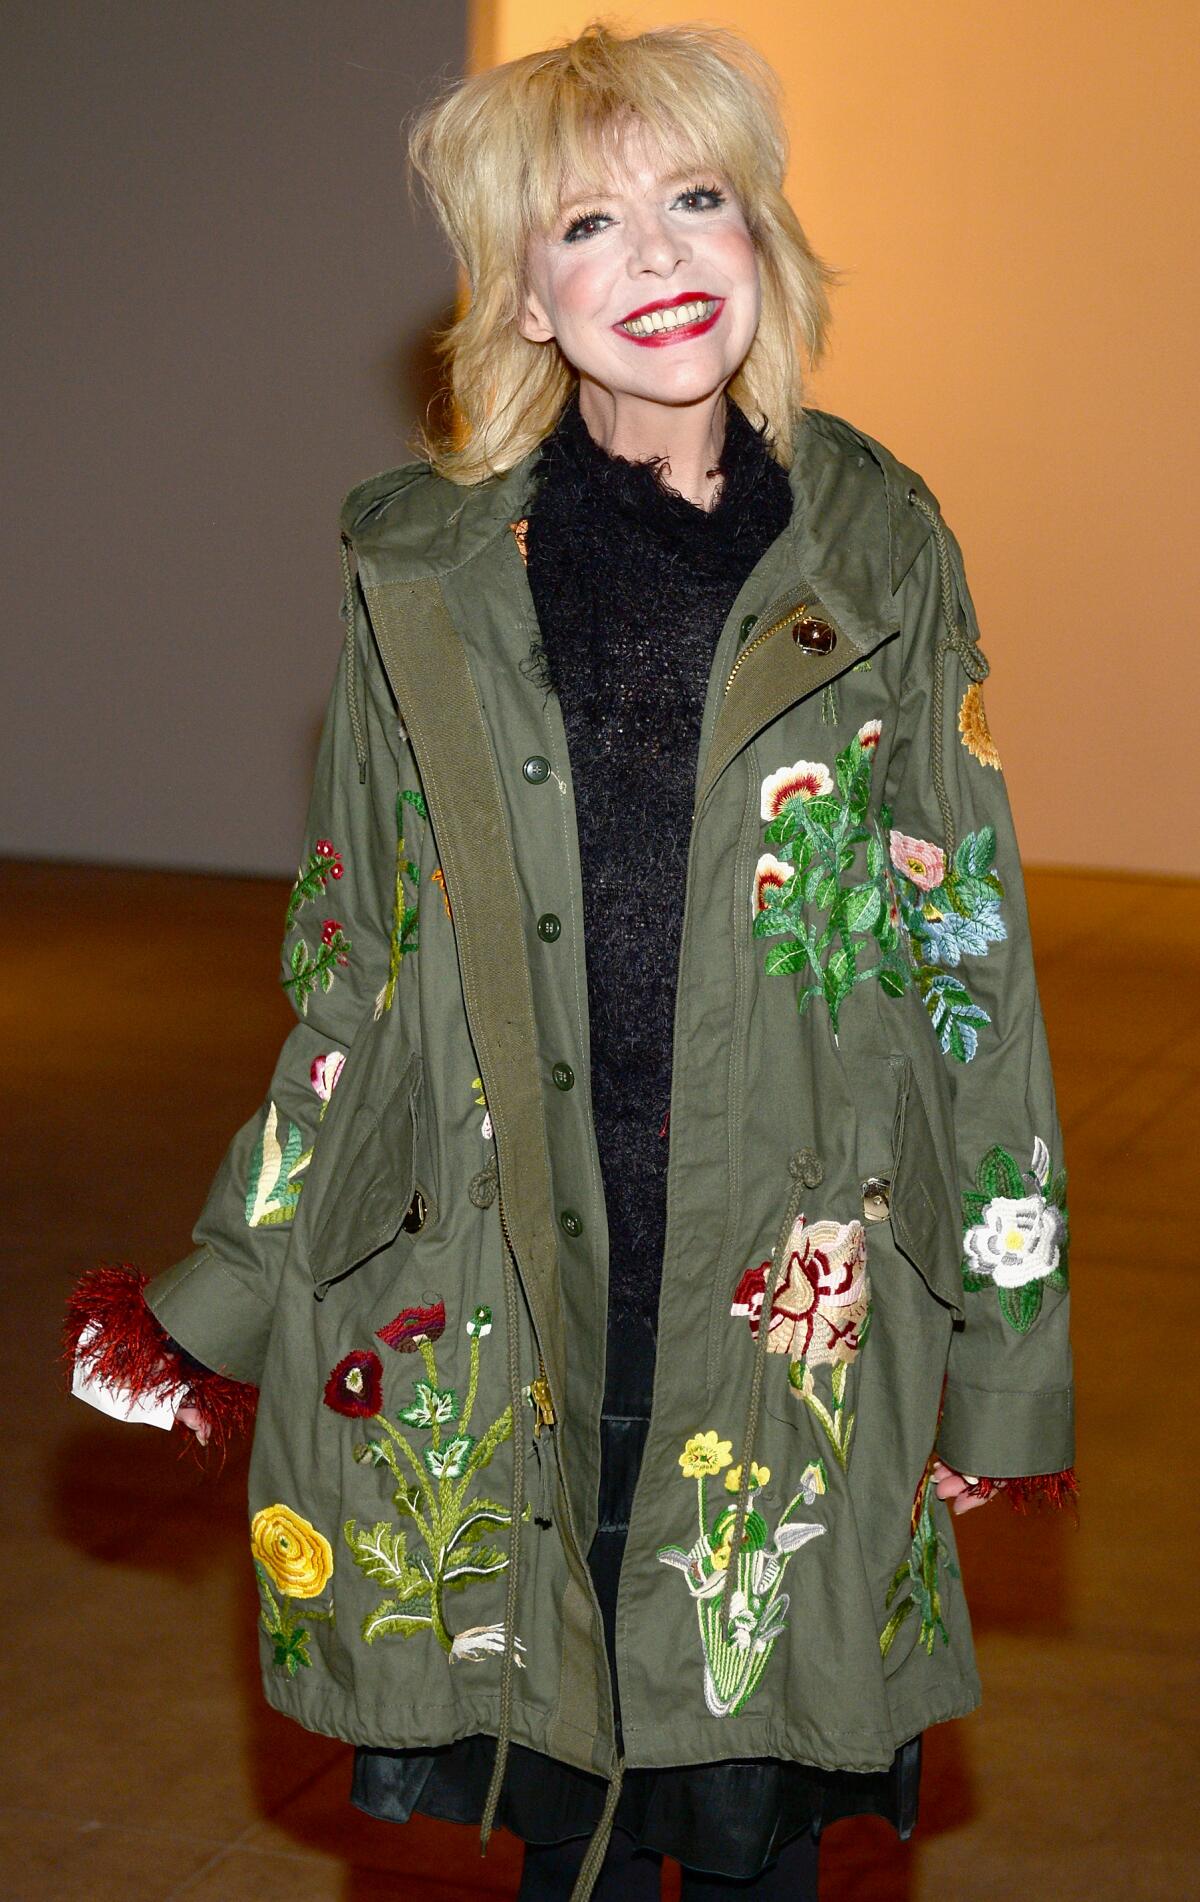  A blonde woman is a long army green jacket with flowers